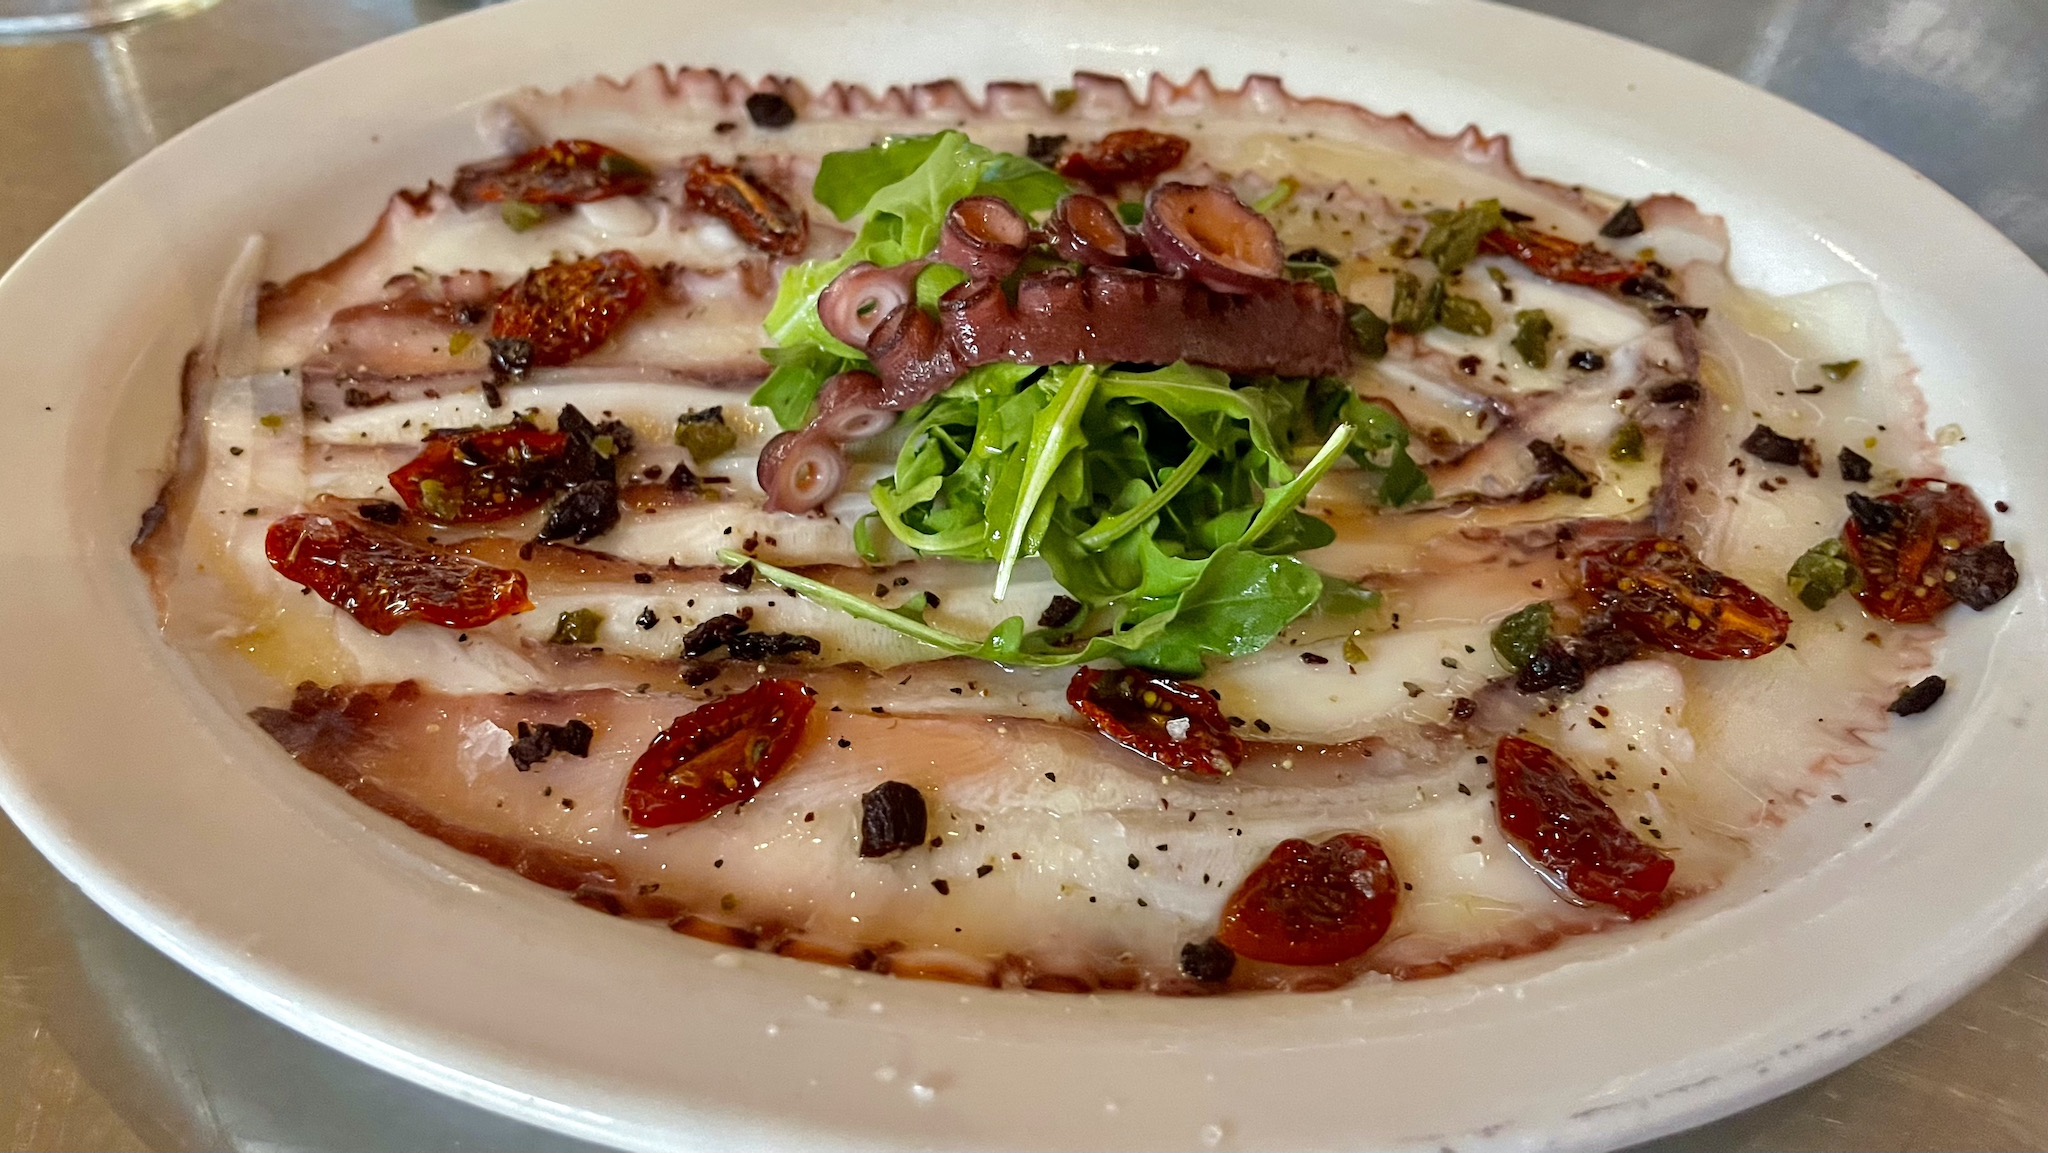 Renzo's Carpaccio of Octopus - Nikkei tiradito of octopus, dressed with evoo and fresh lemon